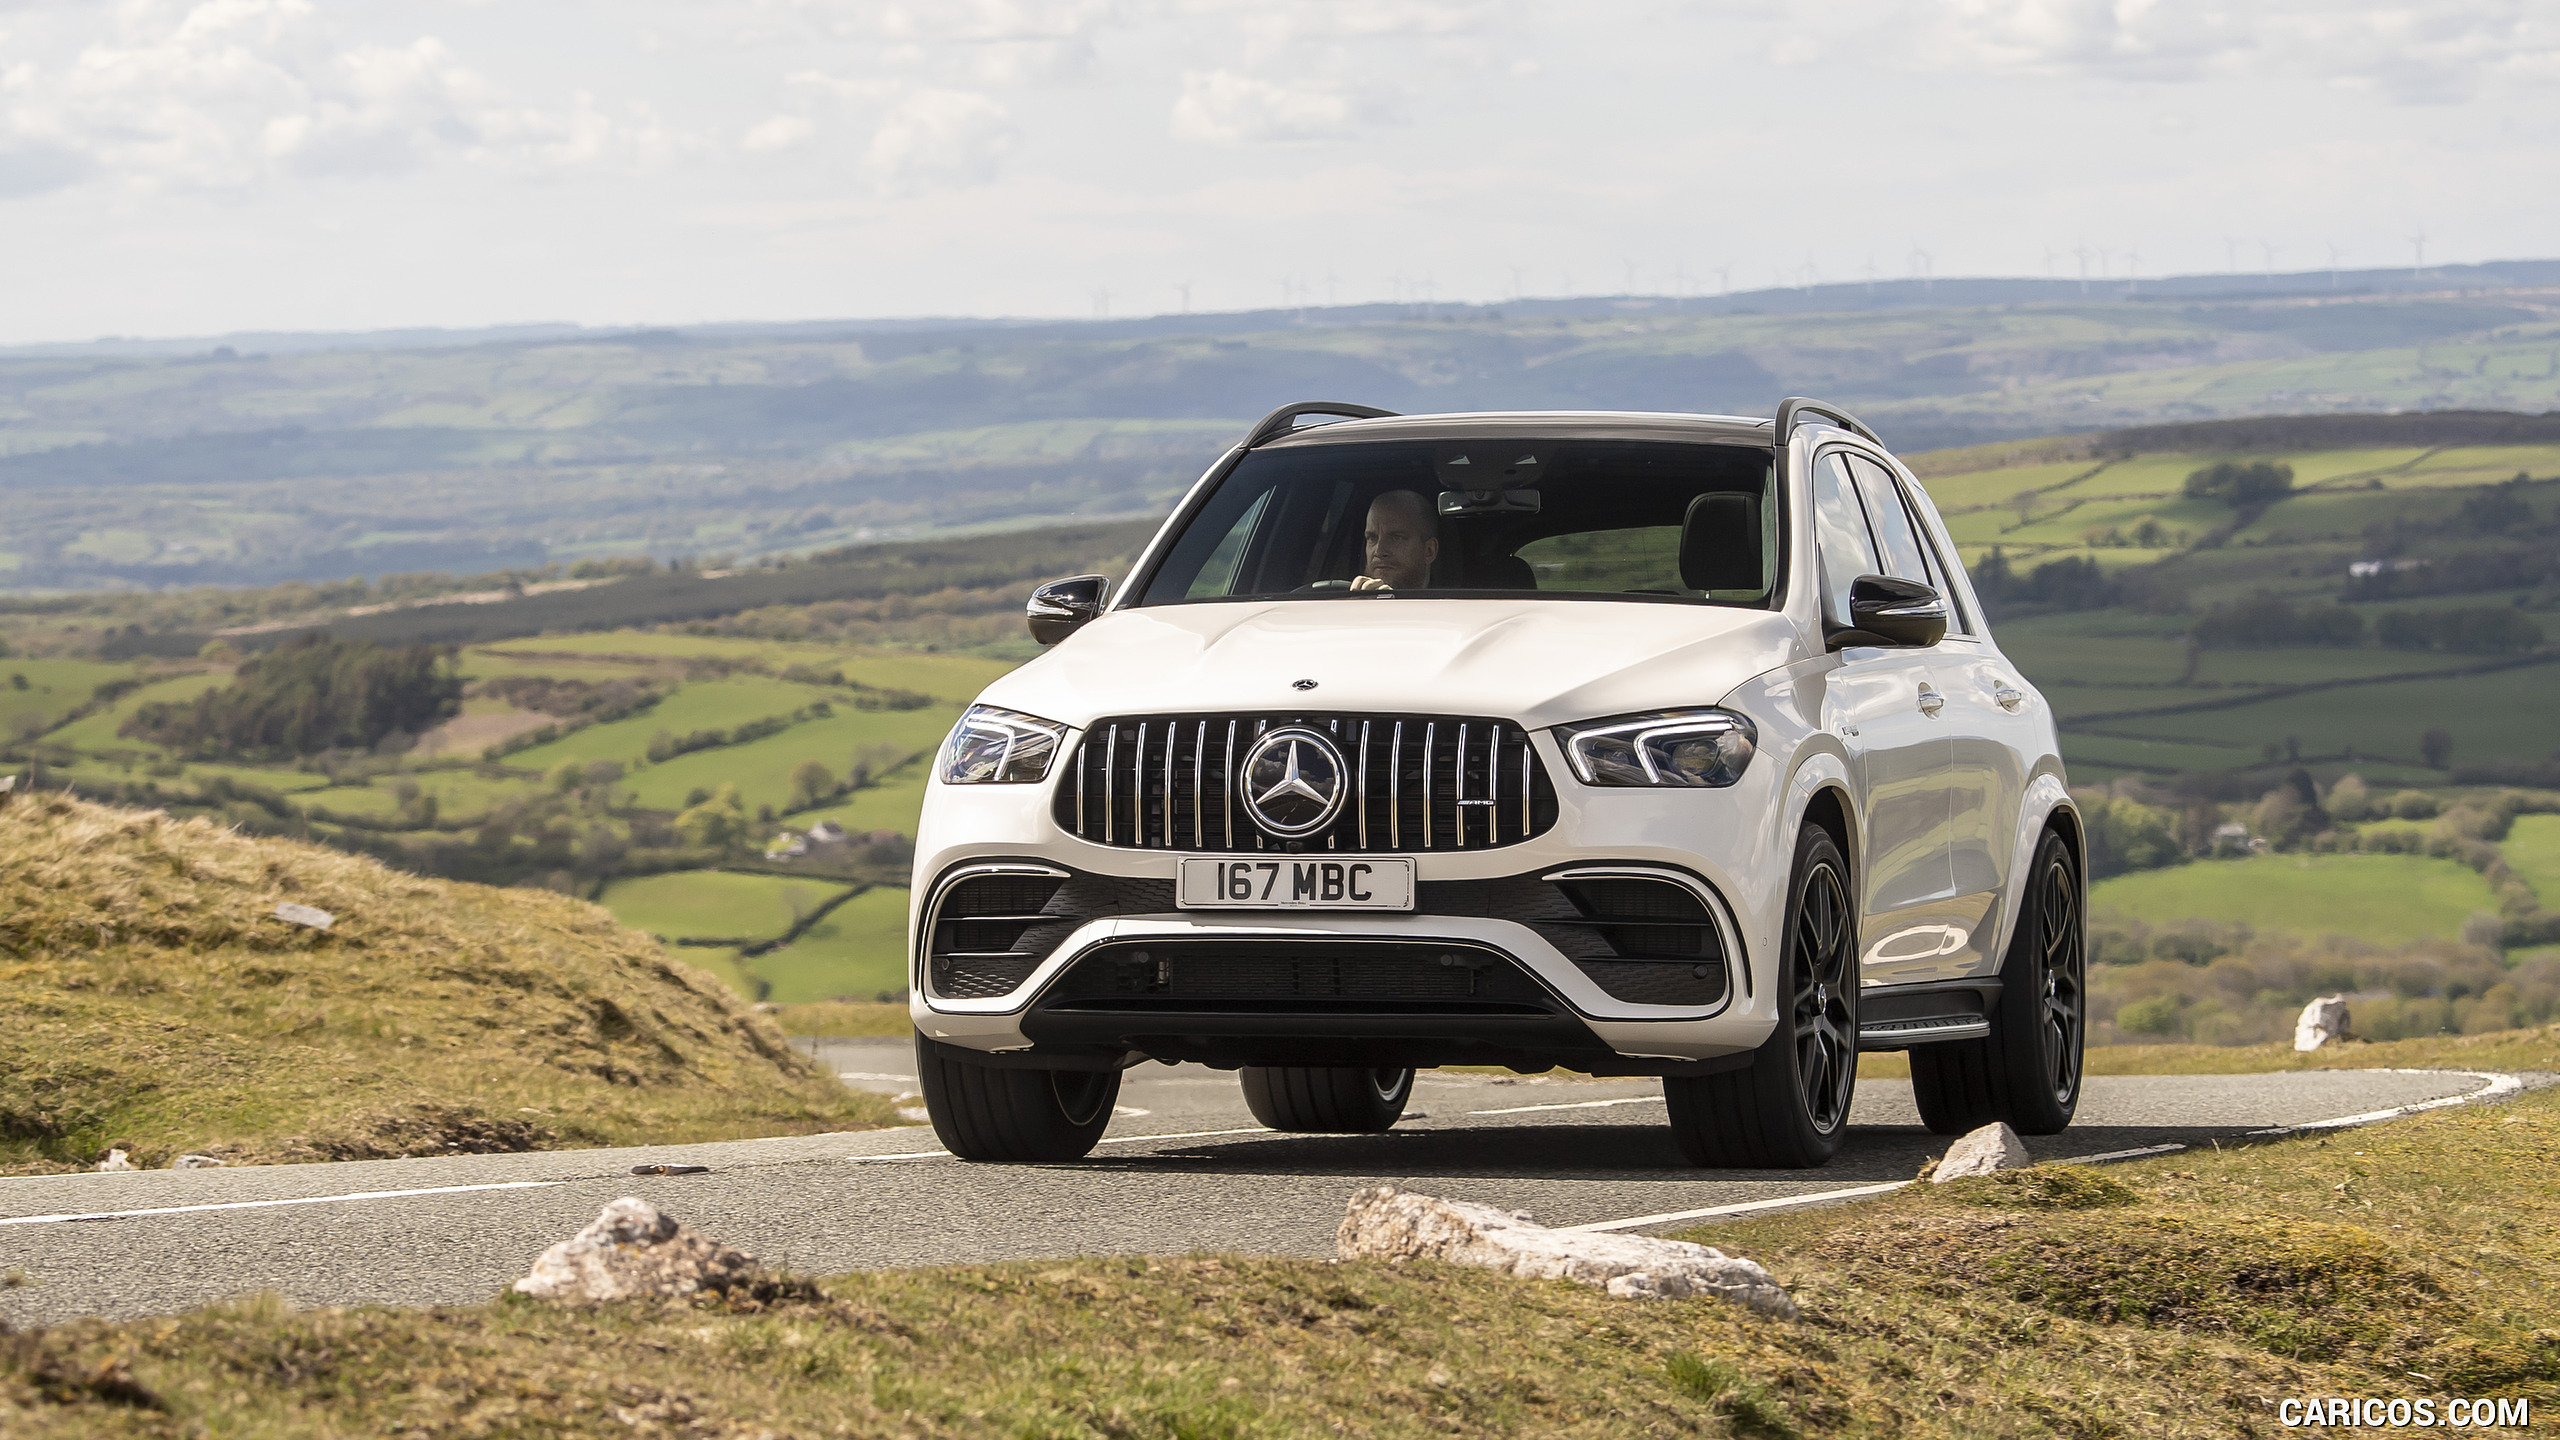 2021 Mercedes-AMG GLE 63 S 4MATIC (UK-Spec) - Front, #97 of 187